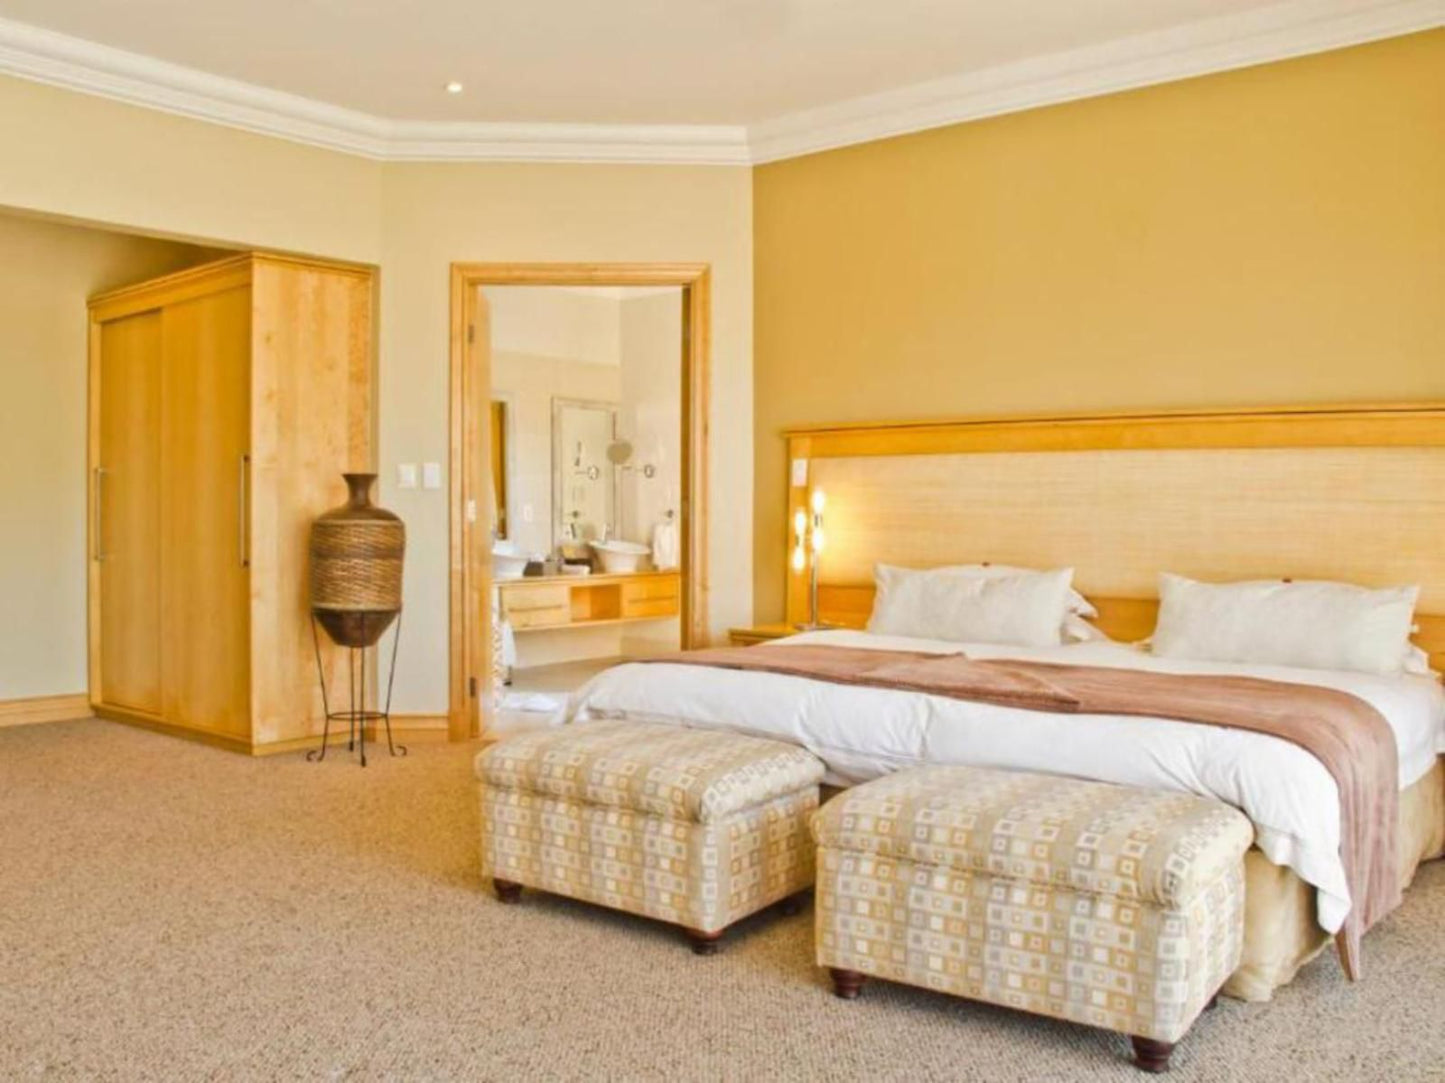 Schneider S Boutique Hotel Guesthouse White River Mpumalanga South Africa Sepia Tones, Bedroom